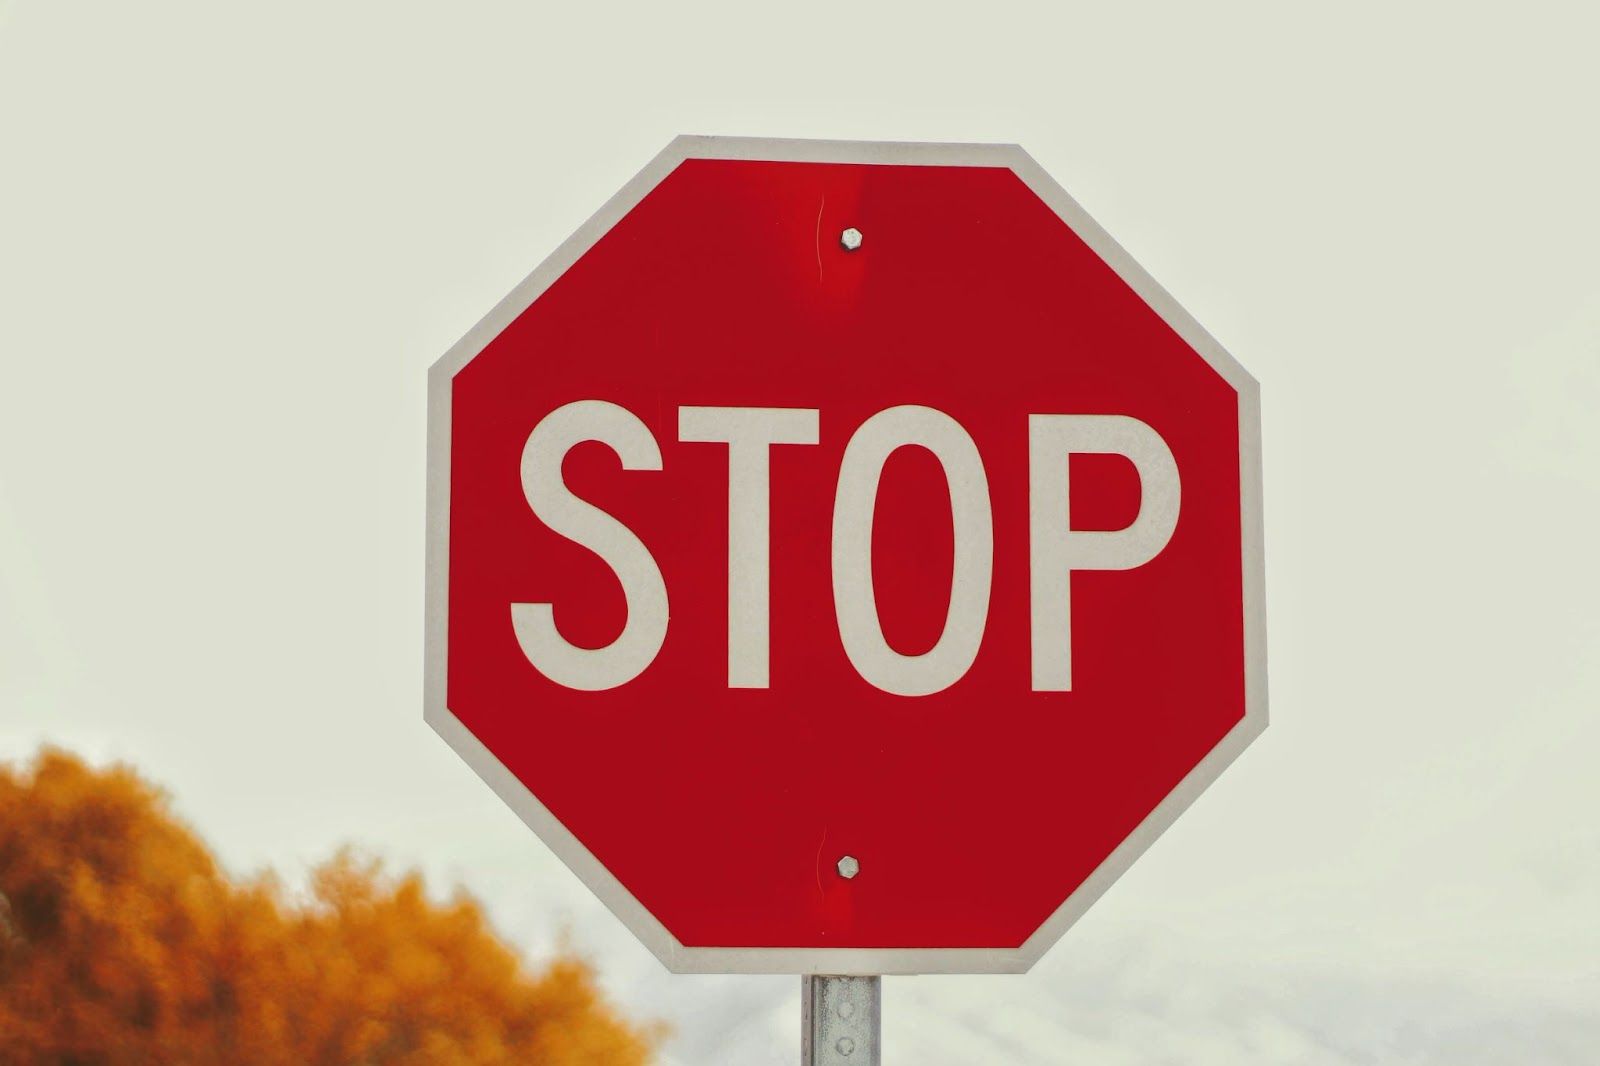 A image of a stop sign to symbolize the help for a web developer work-life balance.